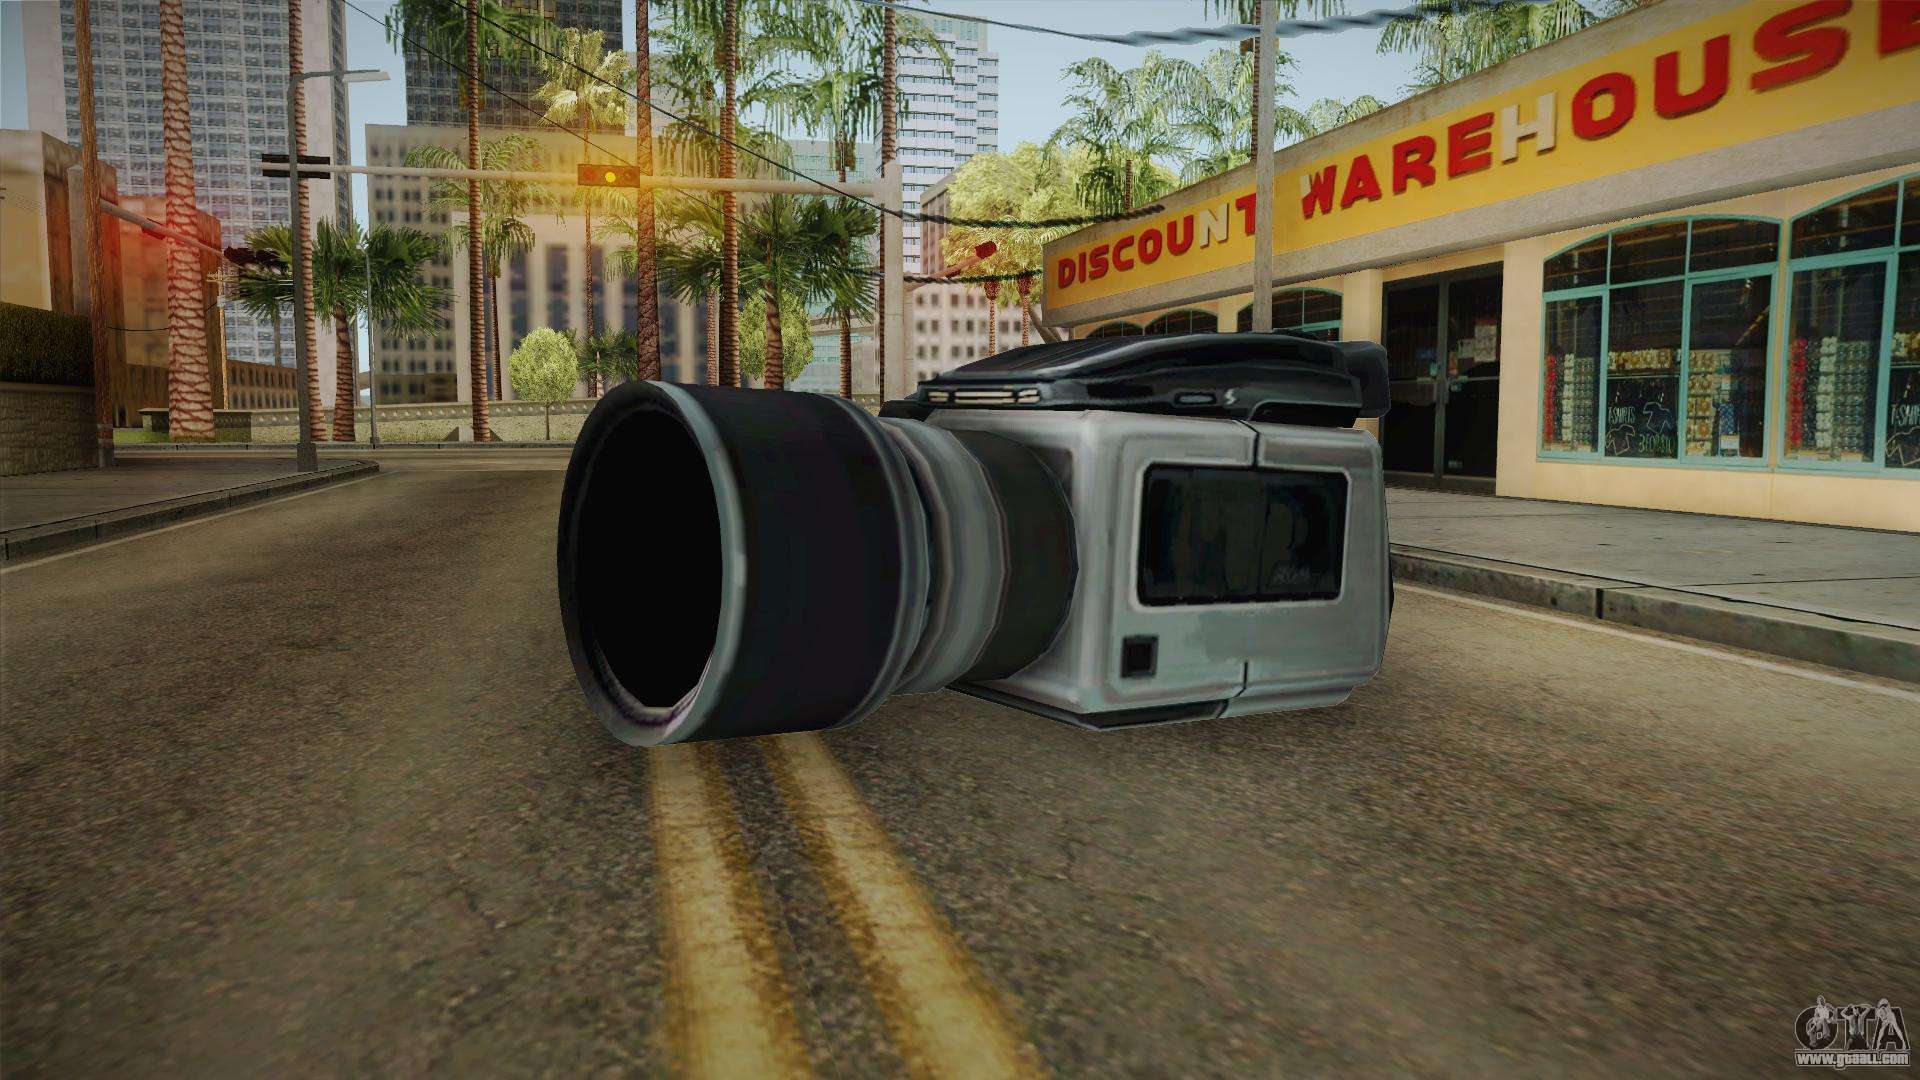 Download Camera without lens for GTA San Andreas